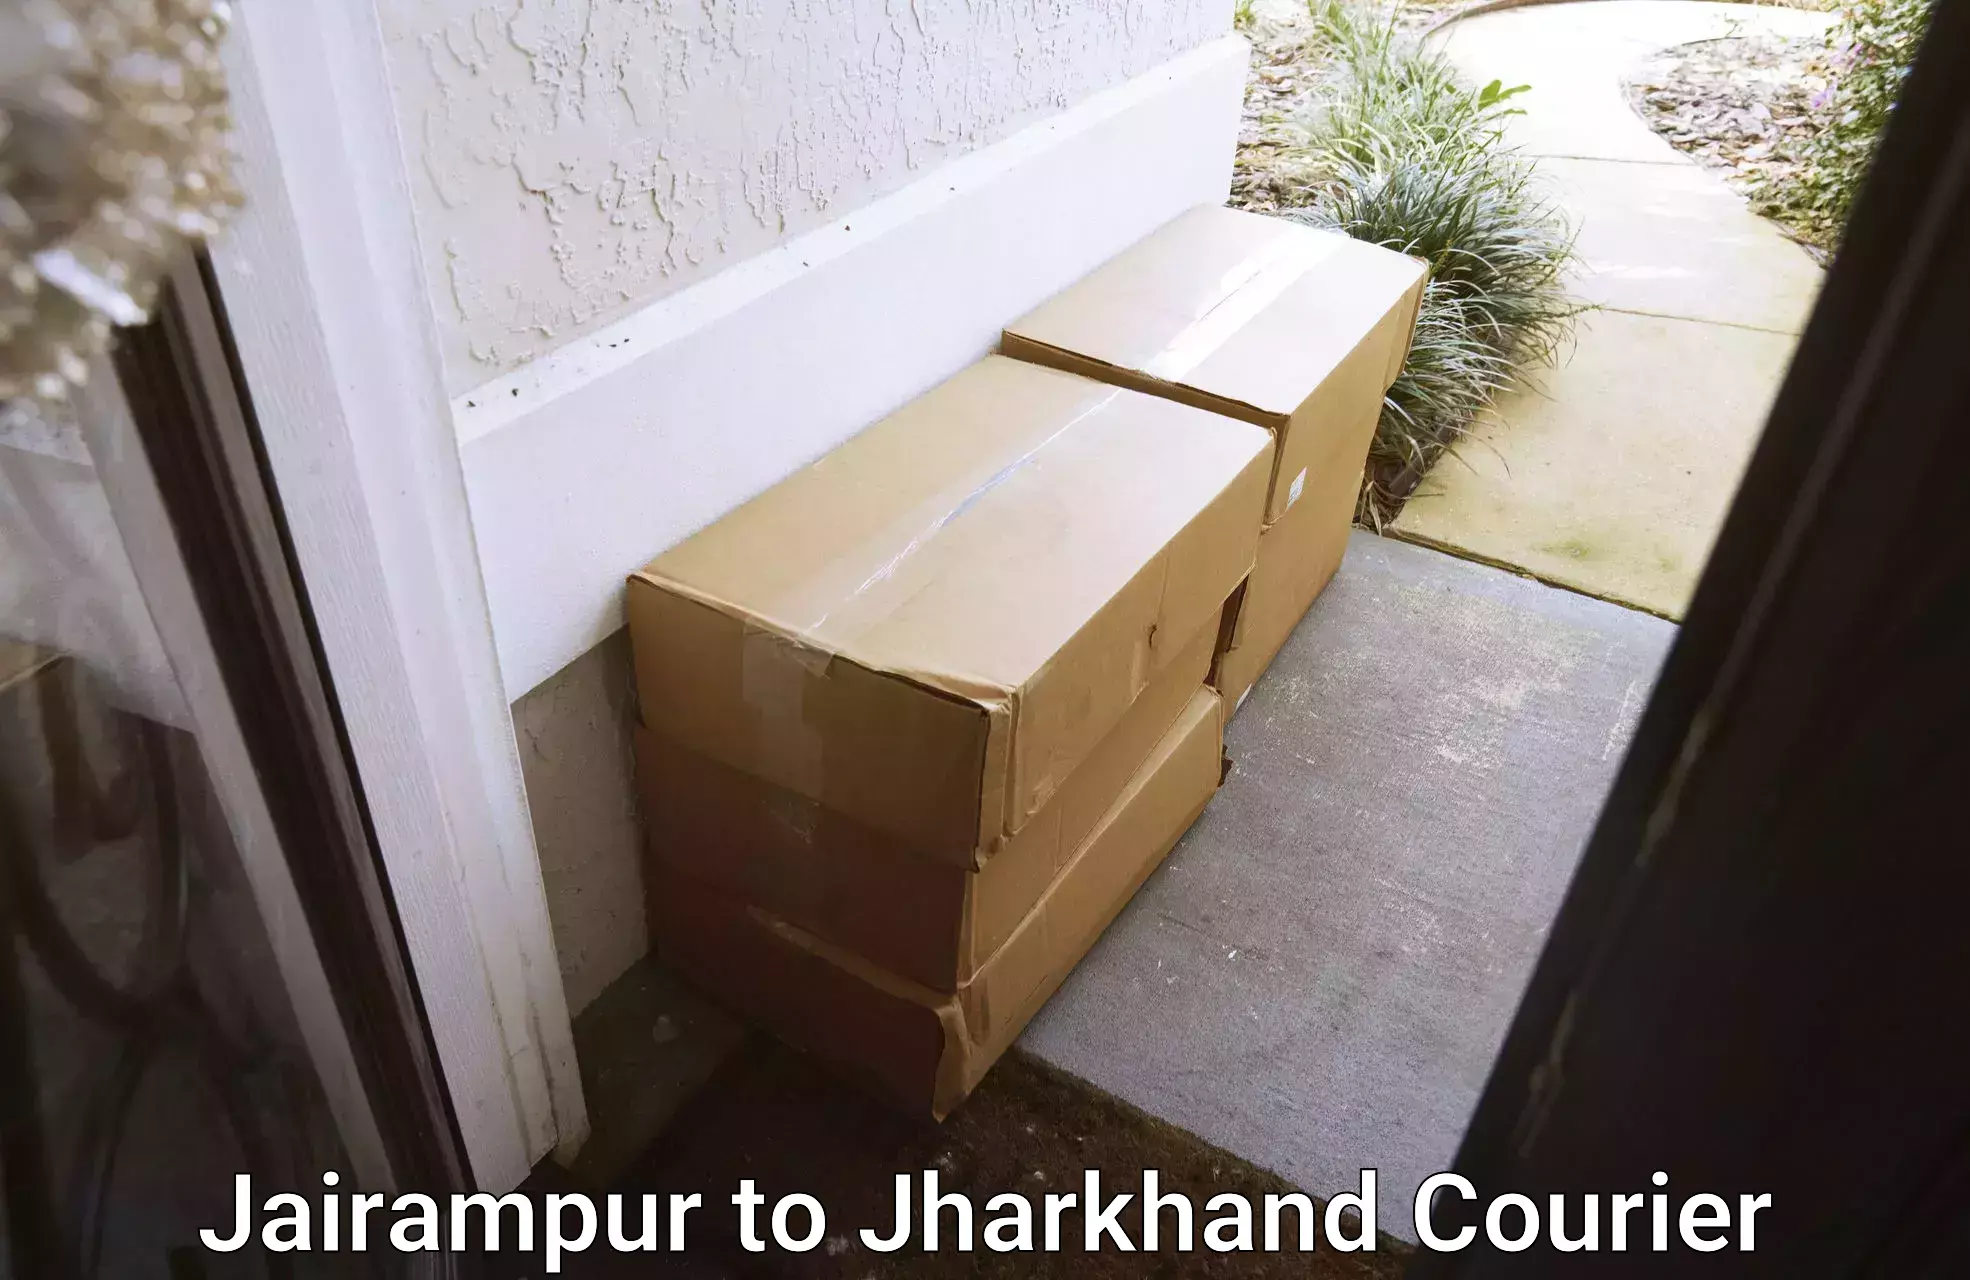 Personal parcel delivery in Jairampur to Jharkhand